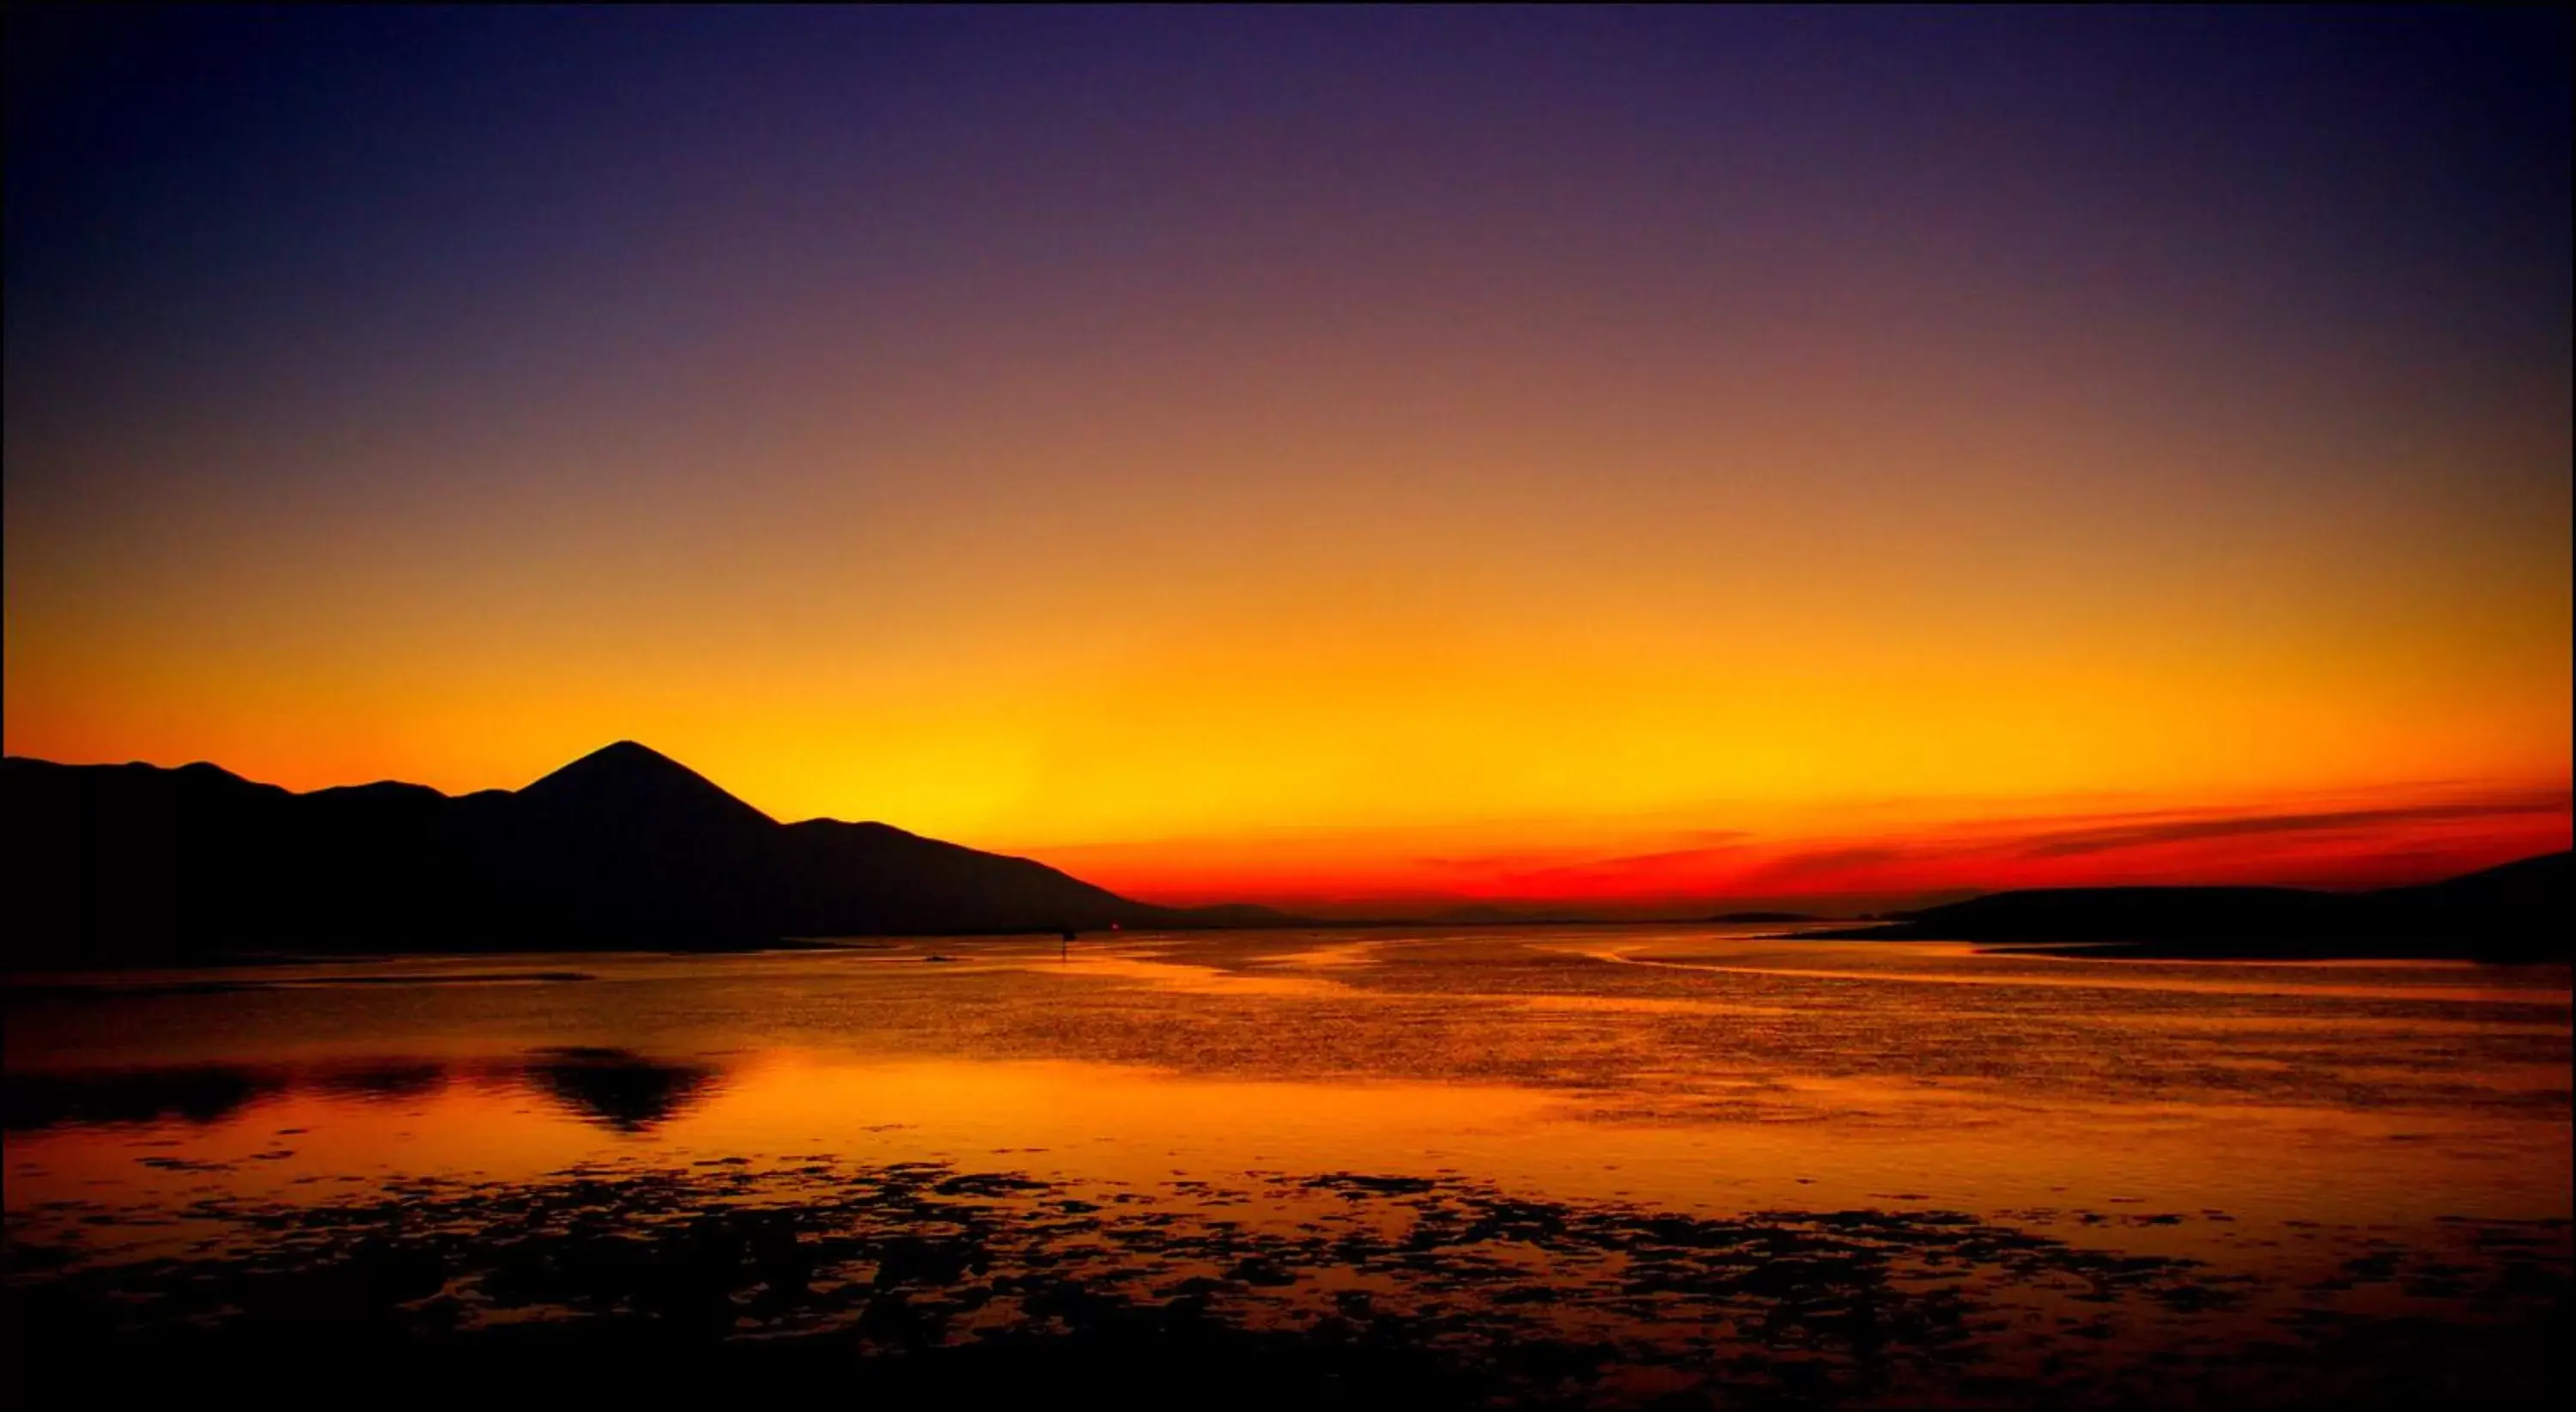 Natural landscape, Sunrise/Sunset in Clew Bay Hotel